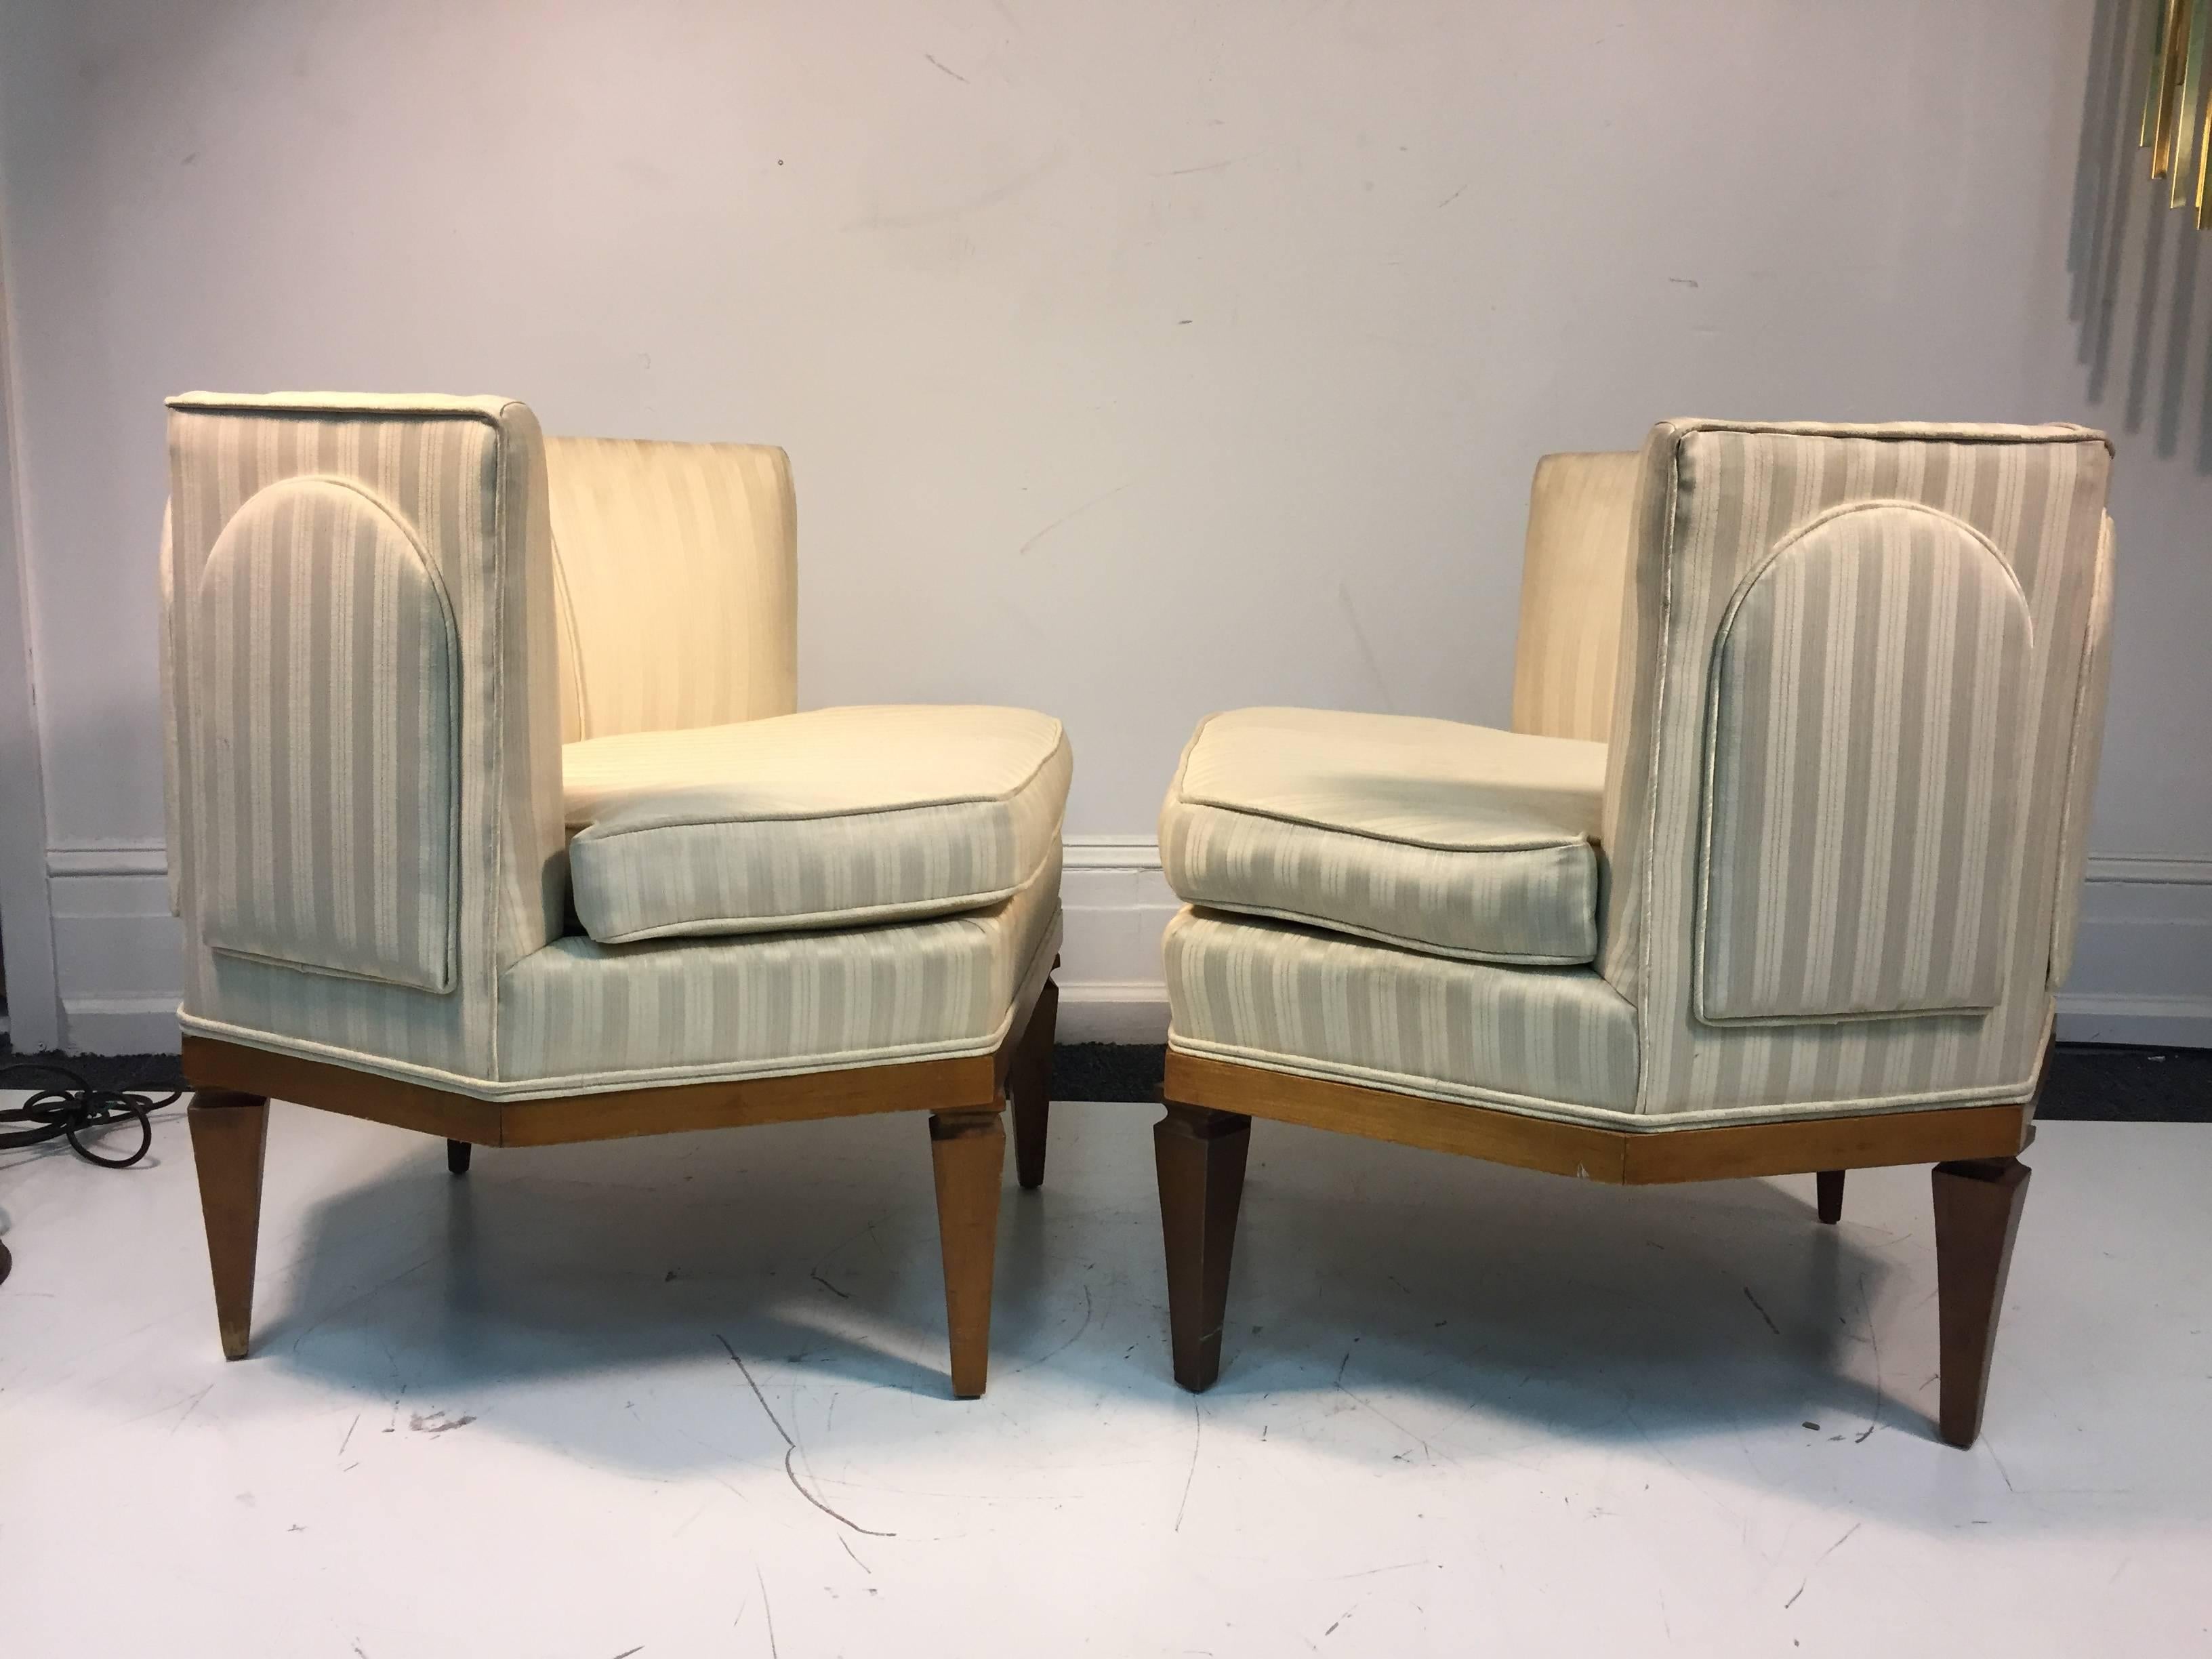 Hollywood Regency Rare Pair of Regency Style Club or Slipper Chairs in the Manner of Parzinger For Sale